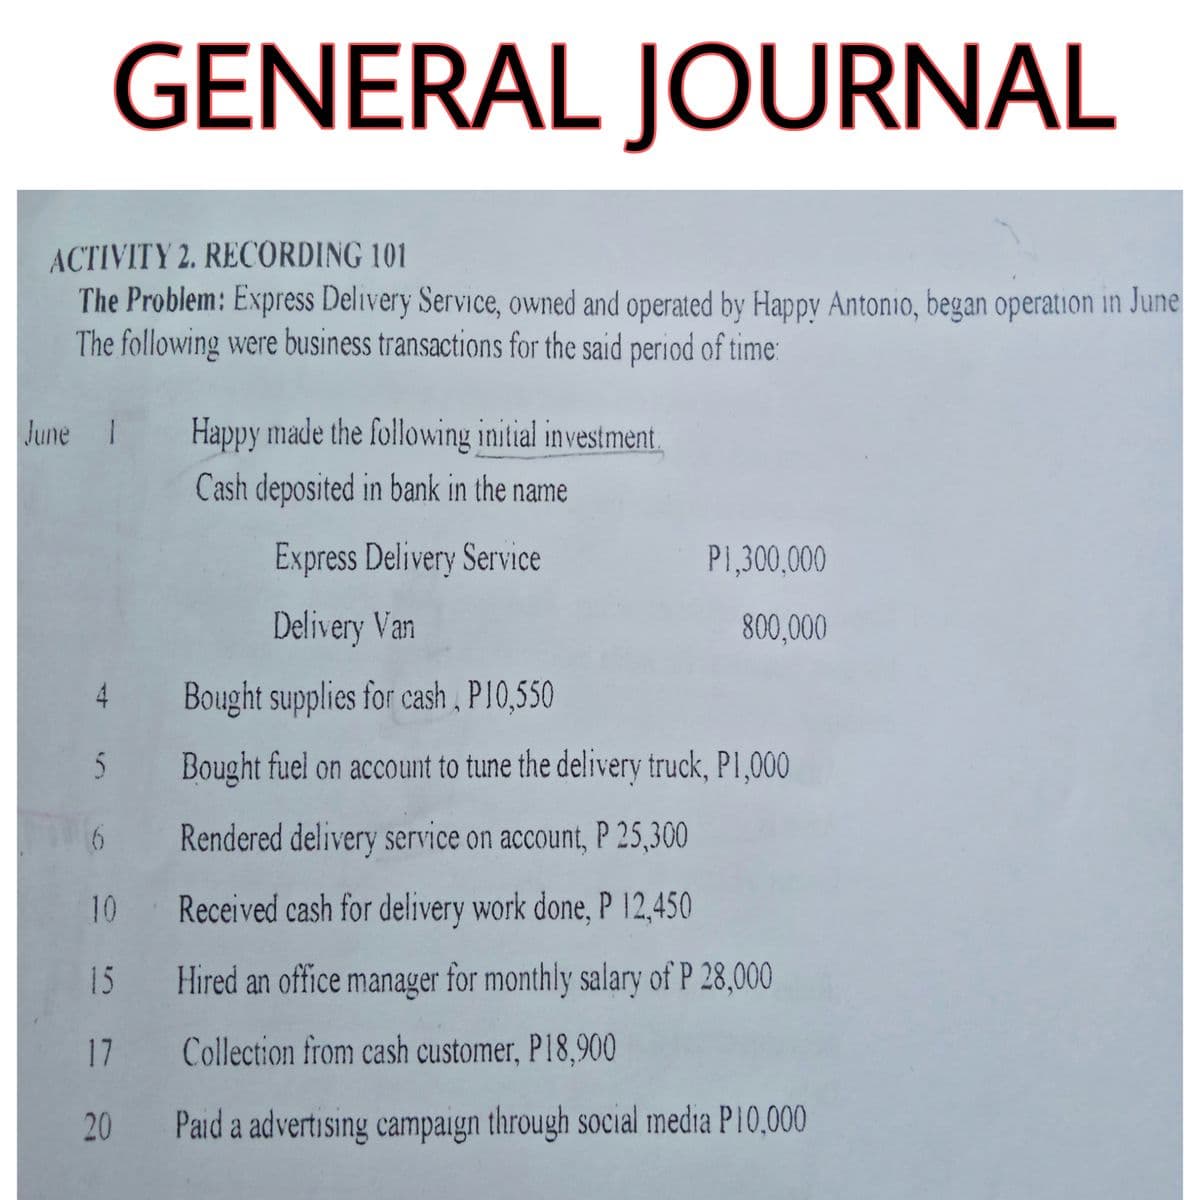 GENERAL JOURNAL
ACTIVITY 2. RECORDING 101
The Problem: Express Delivery Service, owned and operated by Happy Antonio, began operation in June
The following were business transactions for the said period of time:
June 1
Happy made the following initial investment.
Cash deposited in bank in the name
Express Delivery Service
P1,300,000
Delivery Van
800,000
4
Bought supplies for cash, P10,550
Bought fuel on account to tune the delivery truck, P1,000
6
Rendered delivery service on account, P 25,300
10 Received cash for delivery work done, P 12,450
15
Hired an office manager for monthly salary of P 28,000
17
Collection from cash customer, P18,900
20
Paid a advertising campaign through social media P10,000
